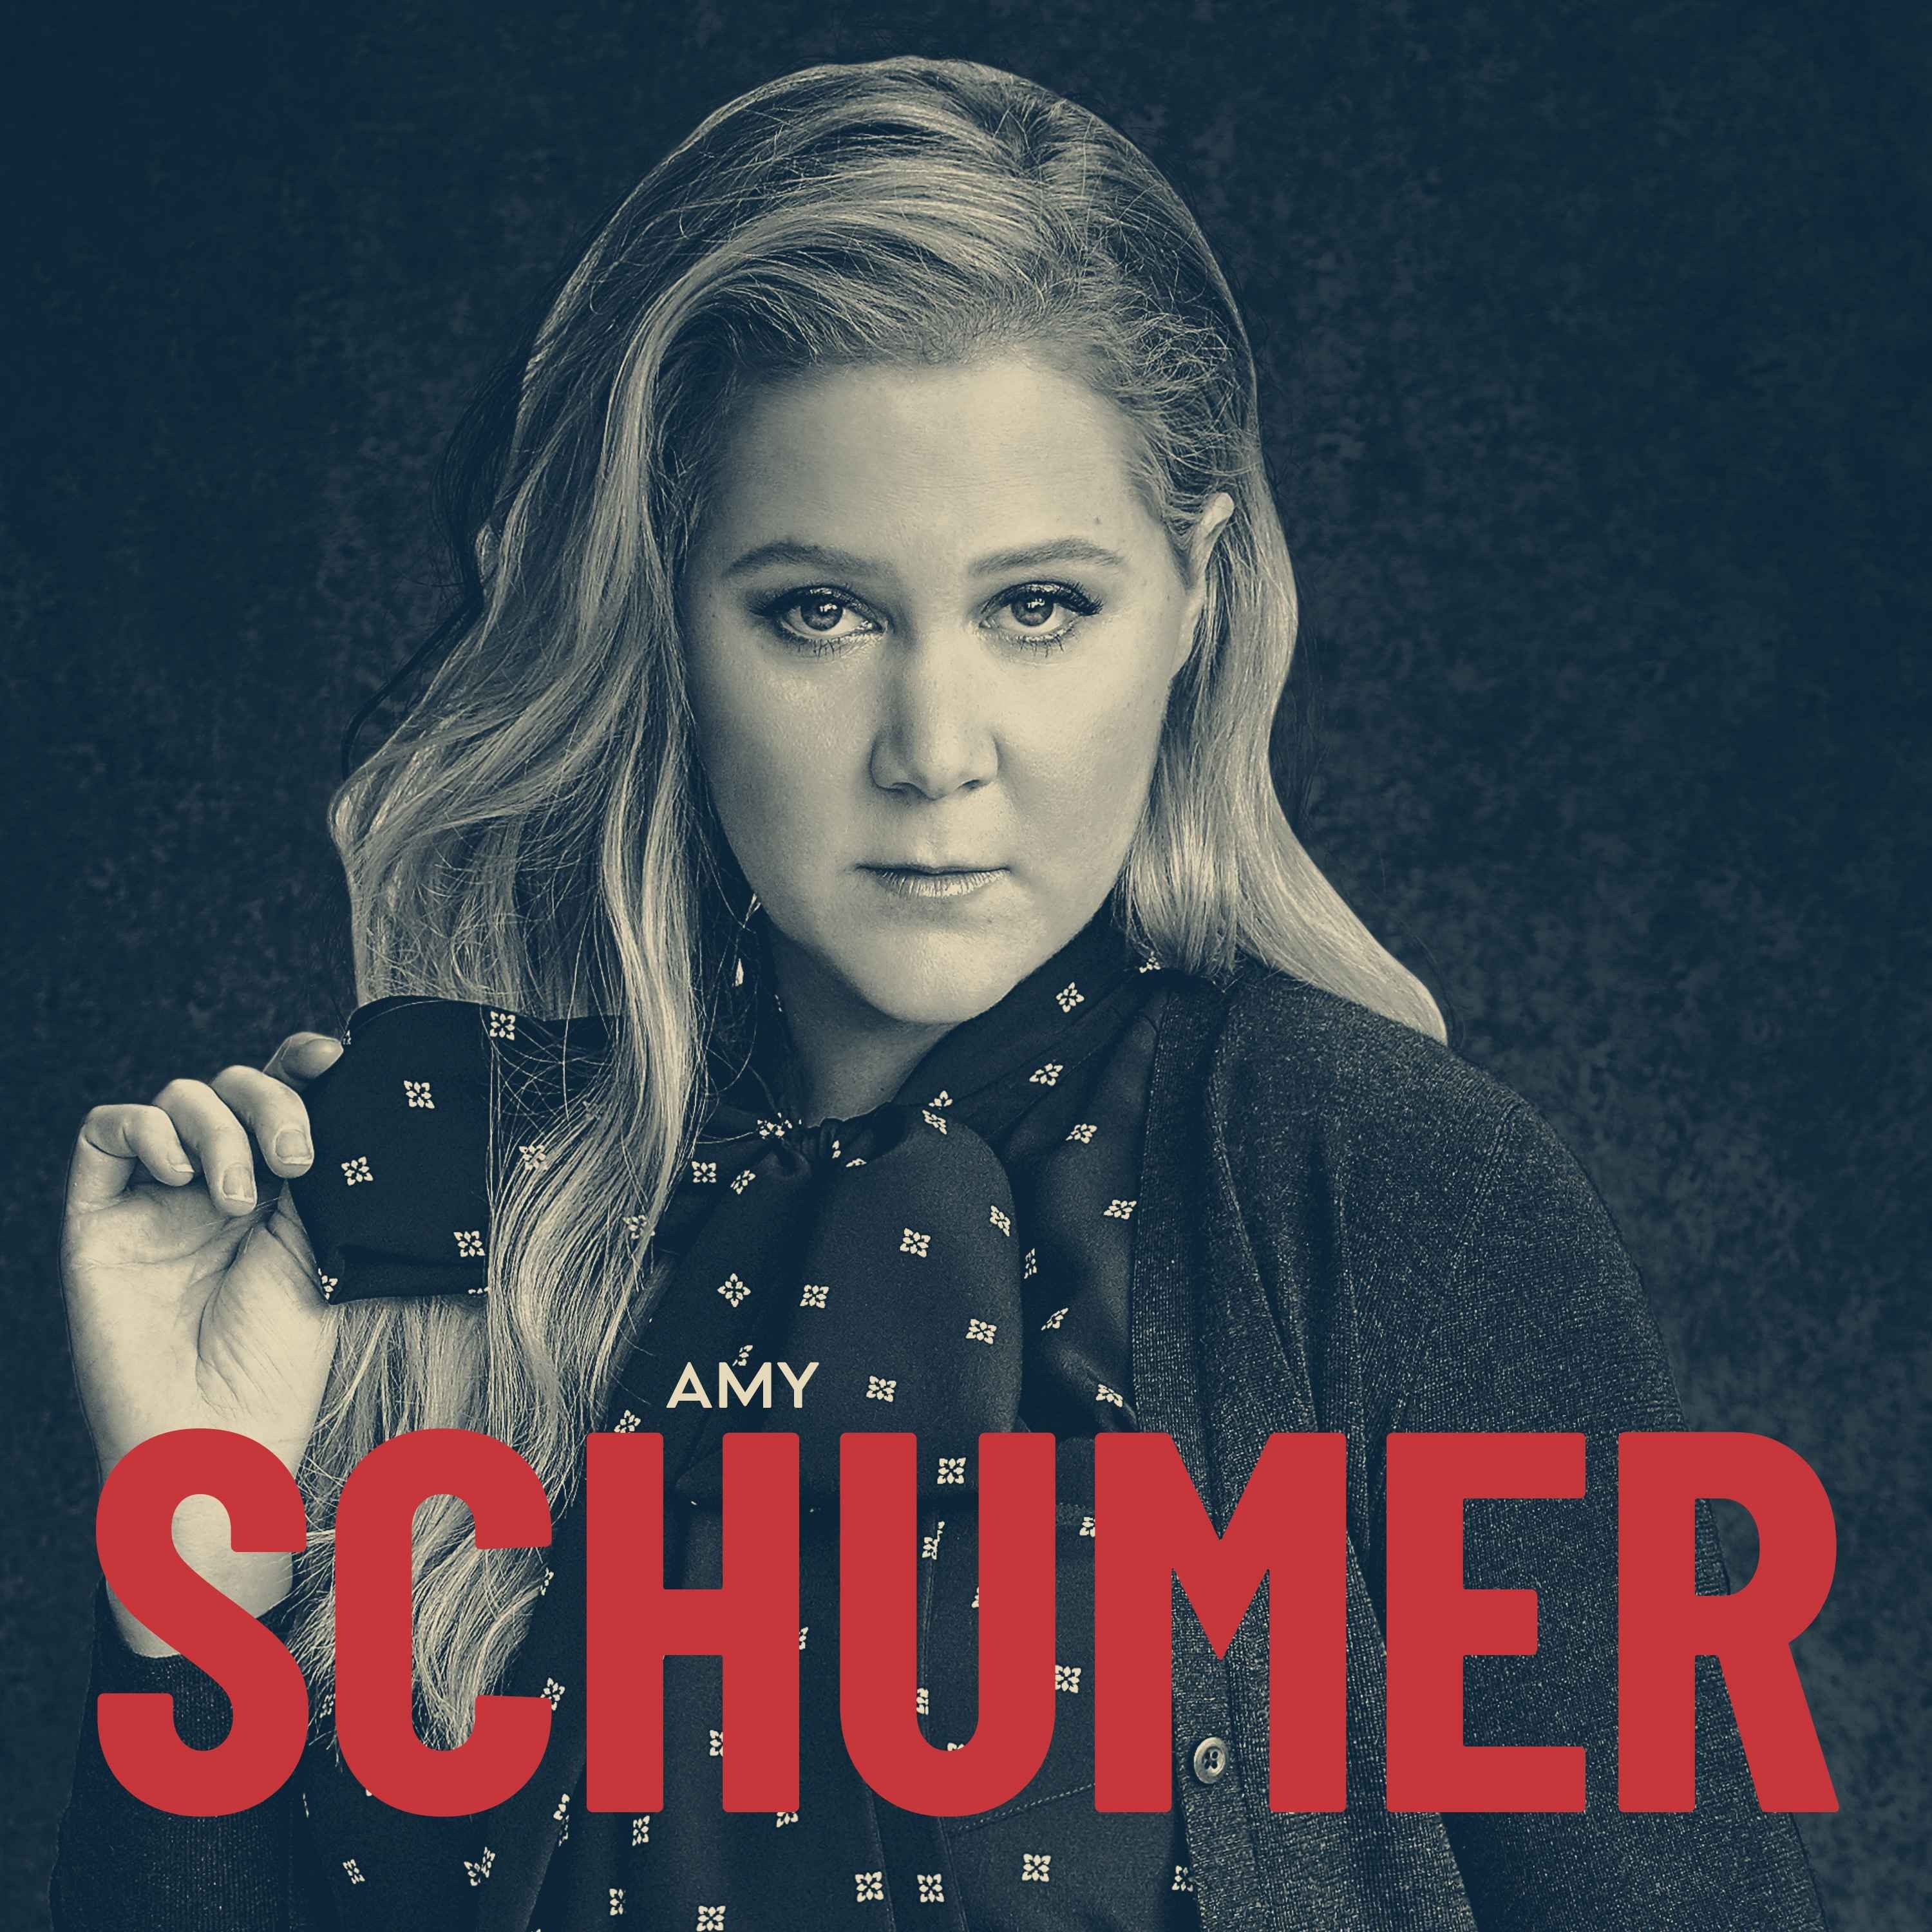 Amy Schumer (Re-release)